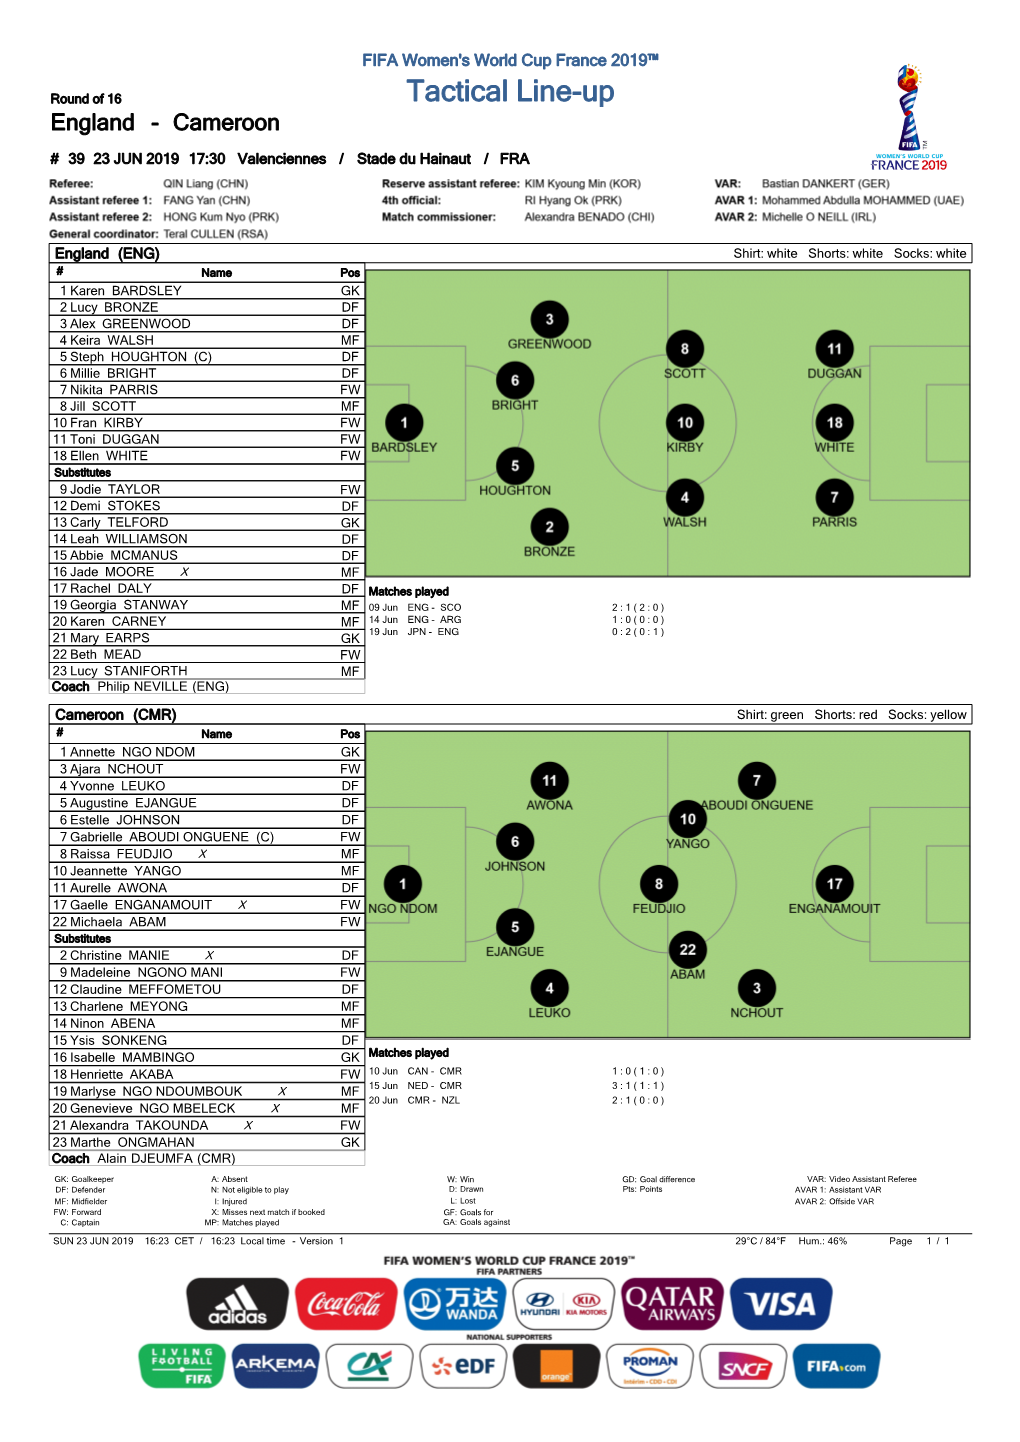 Tactical Line-Up England - Cameroon